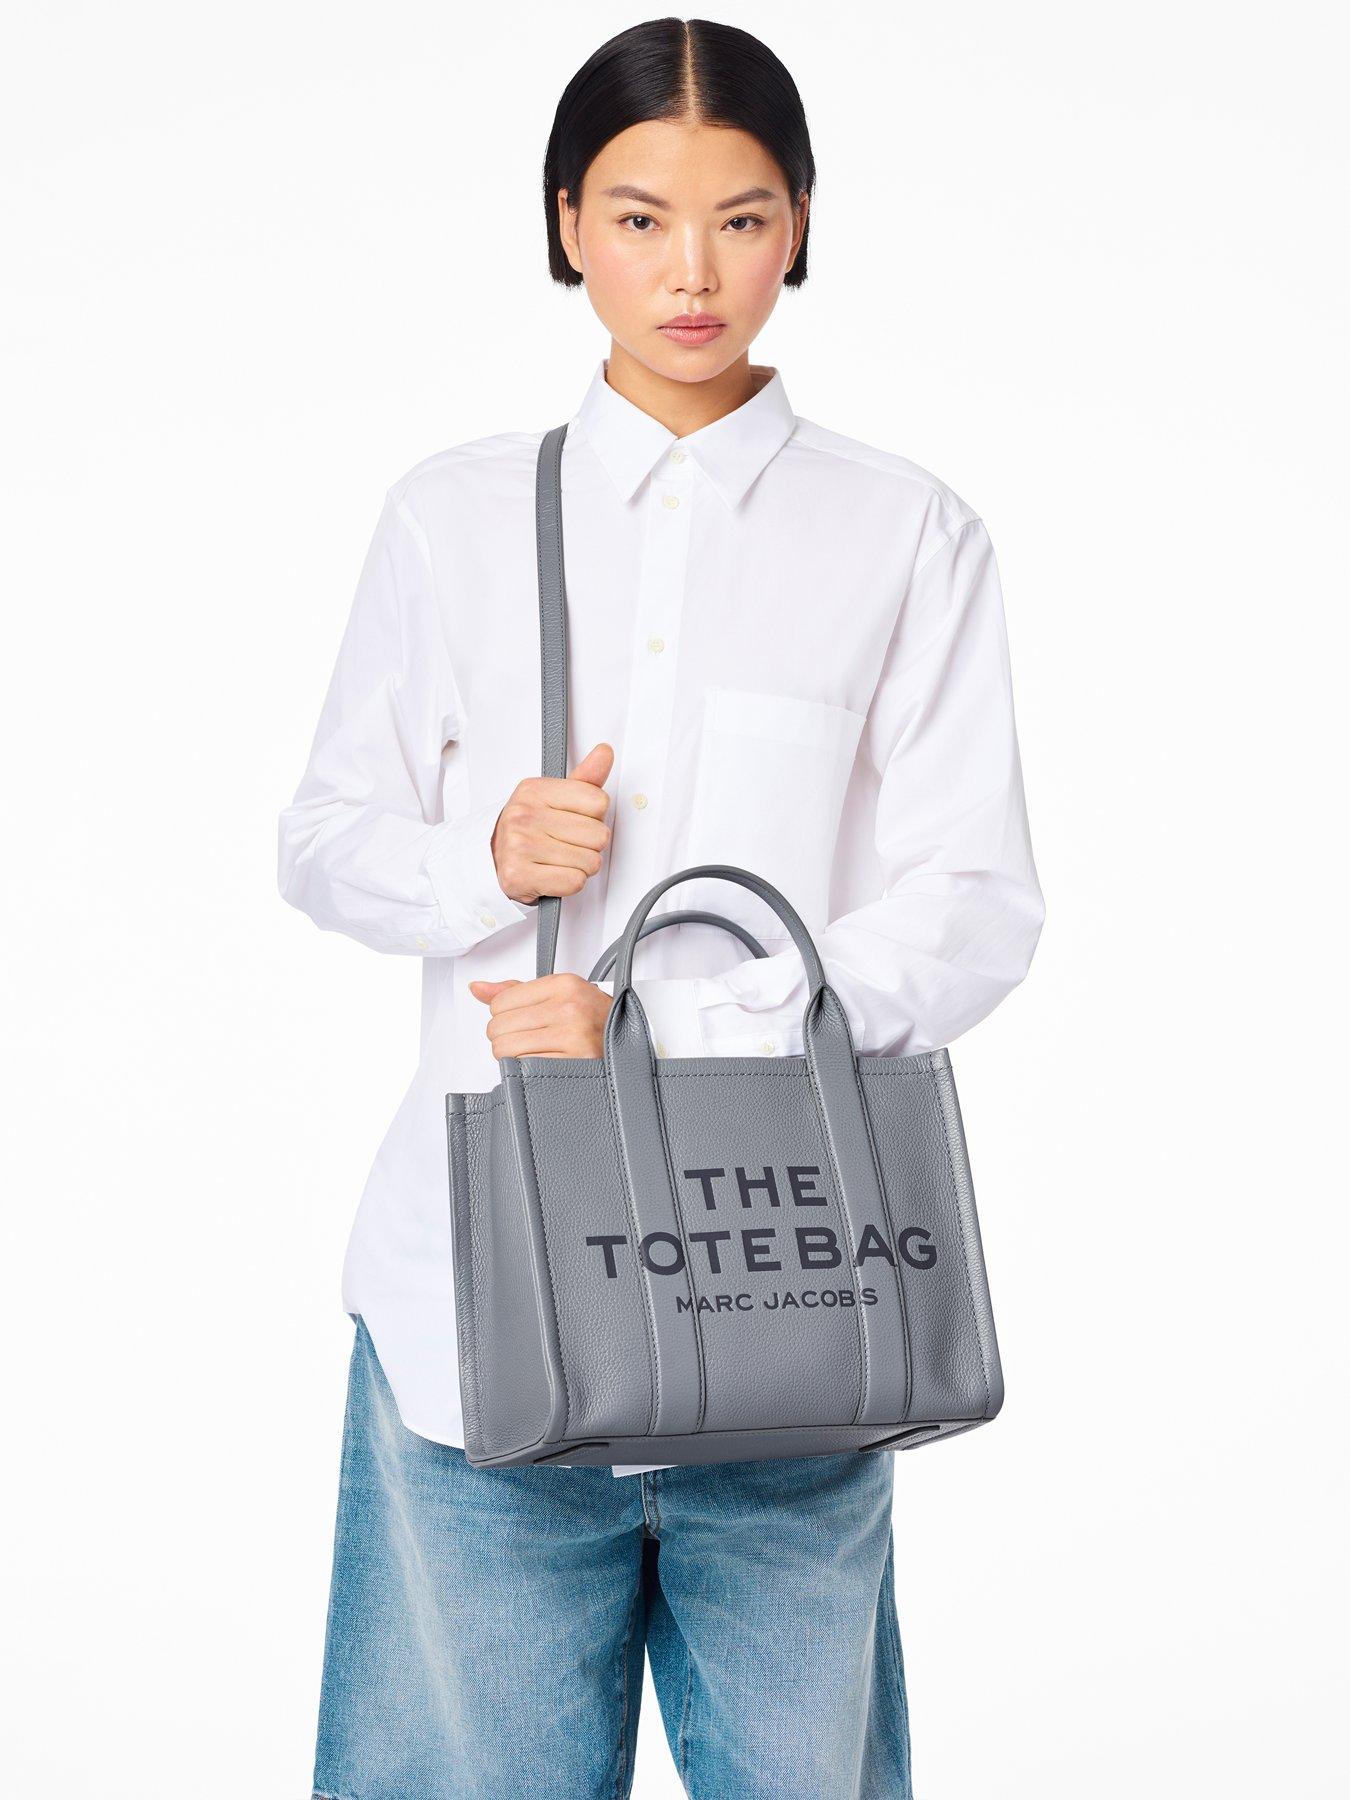 Marc Jacobs The Leather Medium Wolf Grey Tote Bag